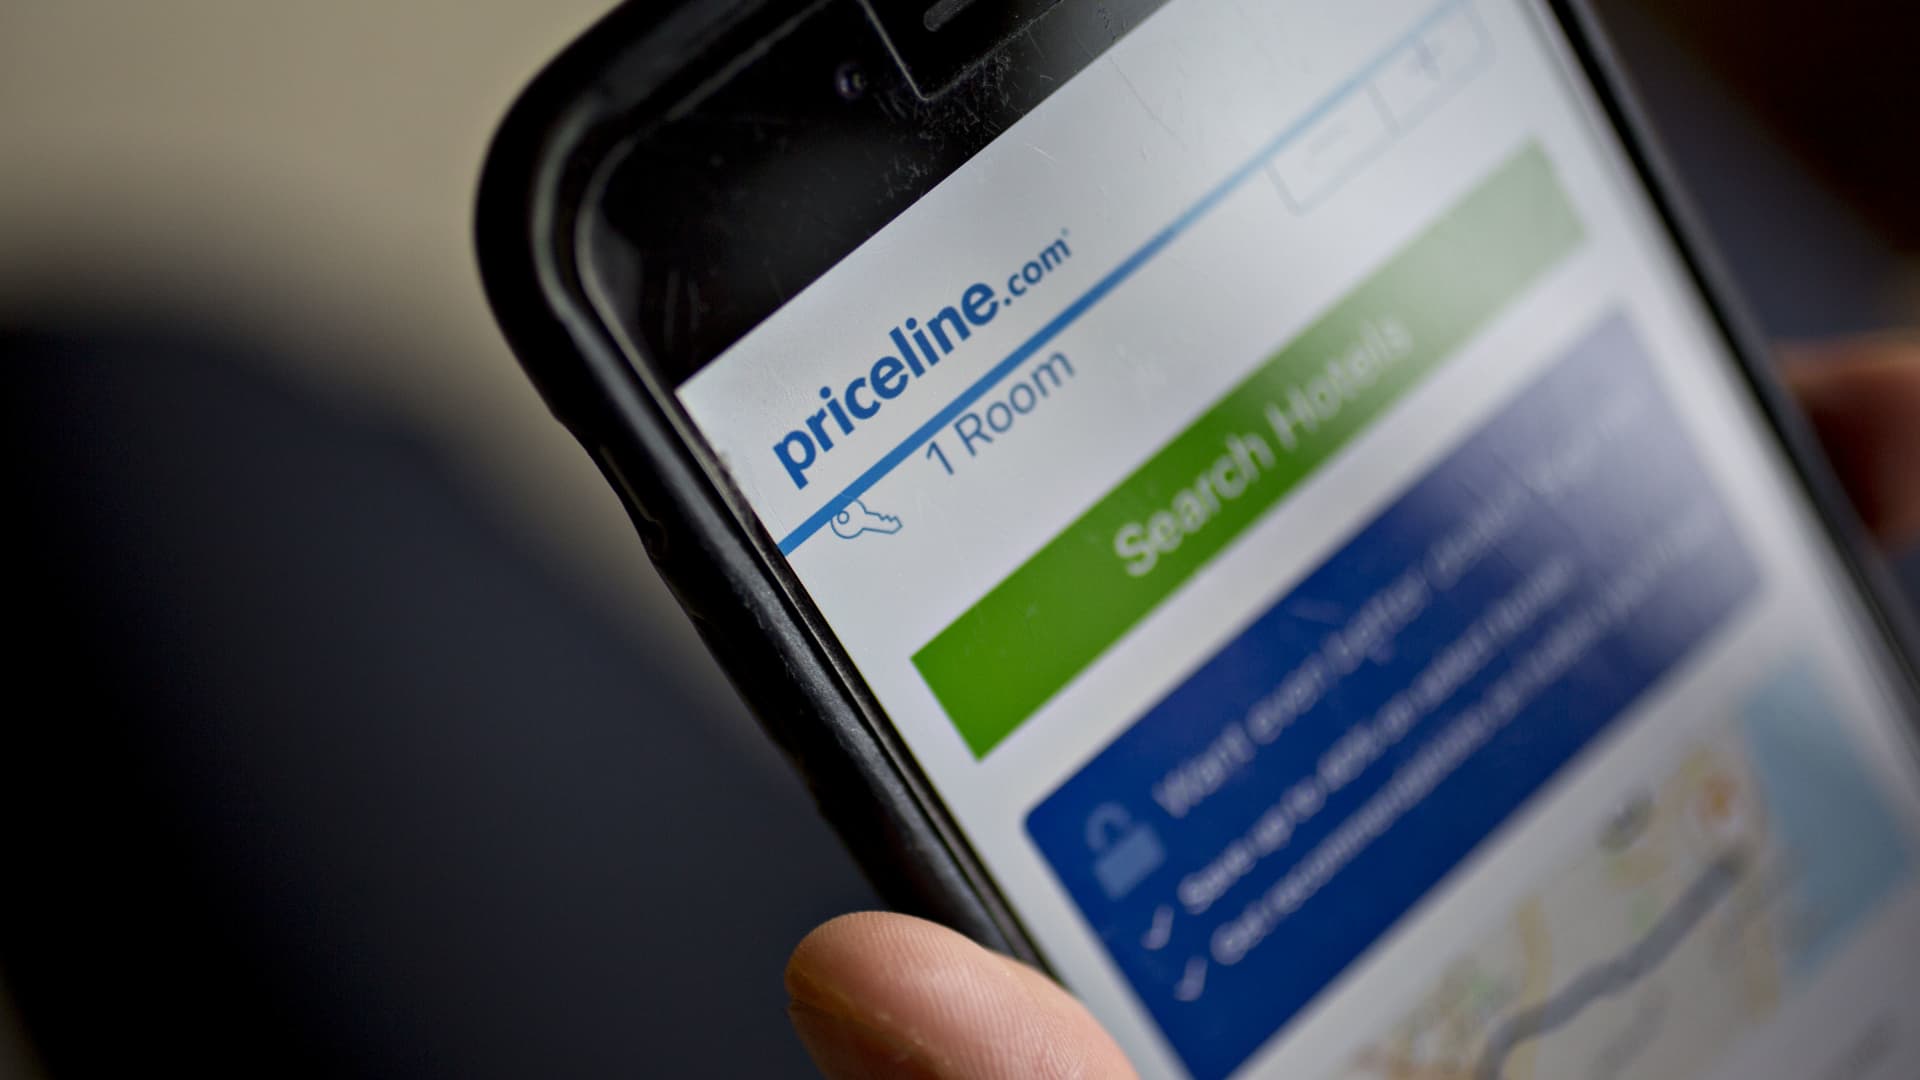 Priceline joins A.I. chatbot race, signing on with Google to help ease travel booking